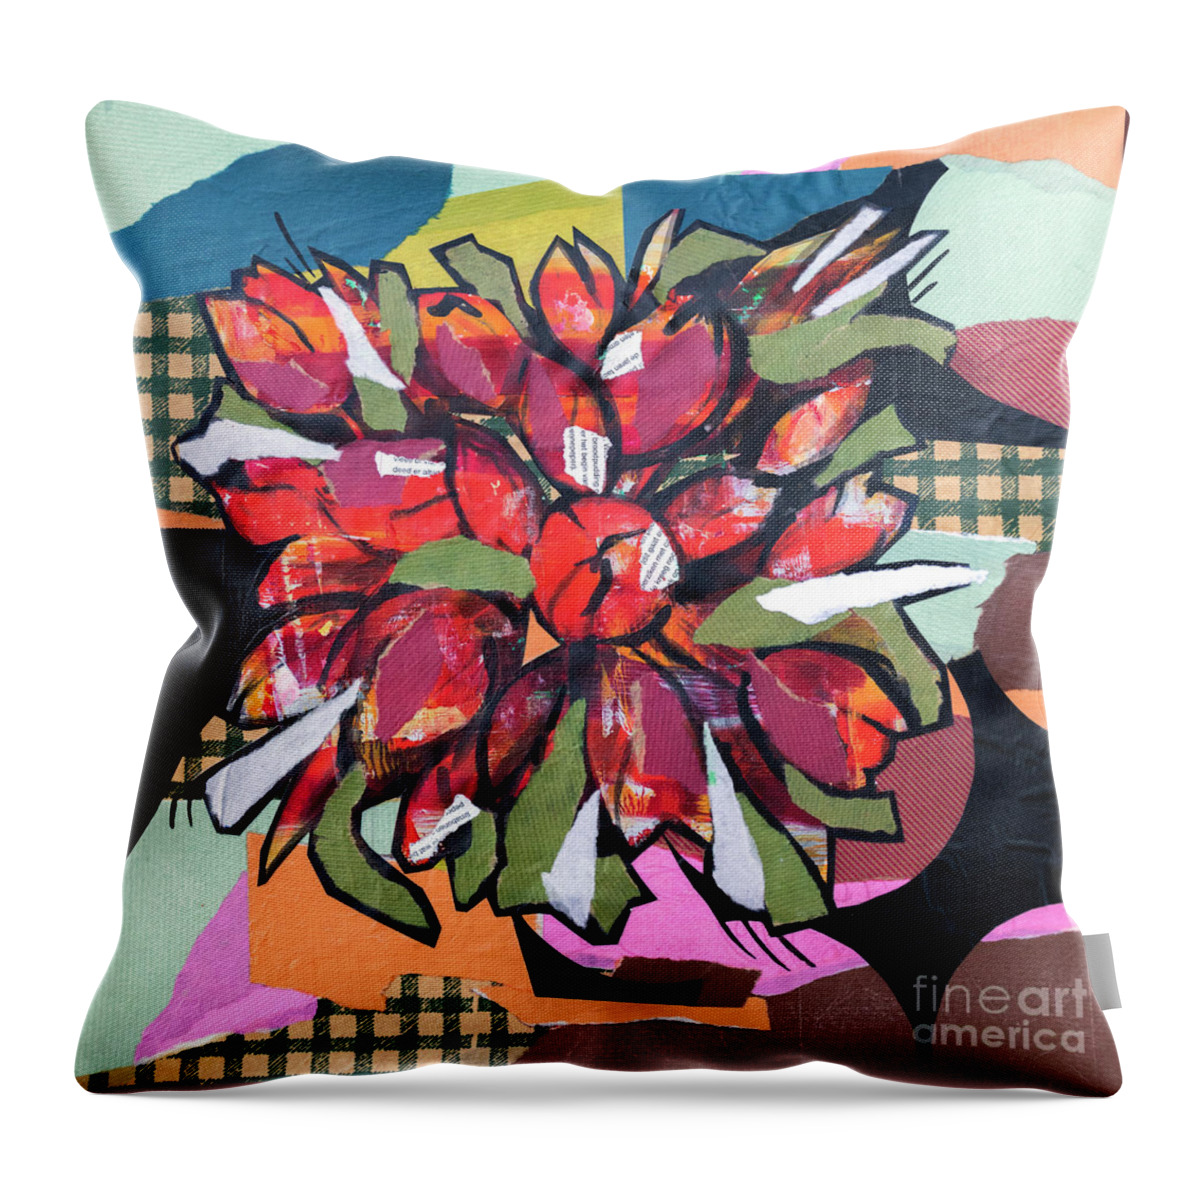 Tulips Throw Pillow featuring the painting Flowers, Art Collage by Ariadna De Raadt